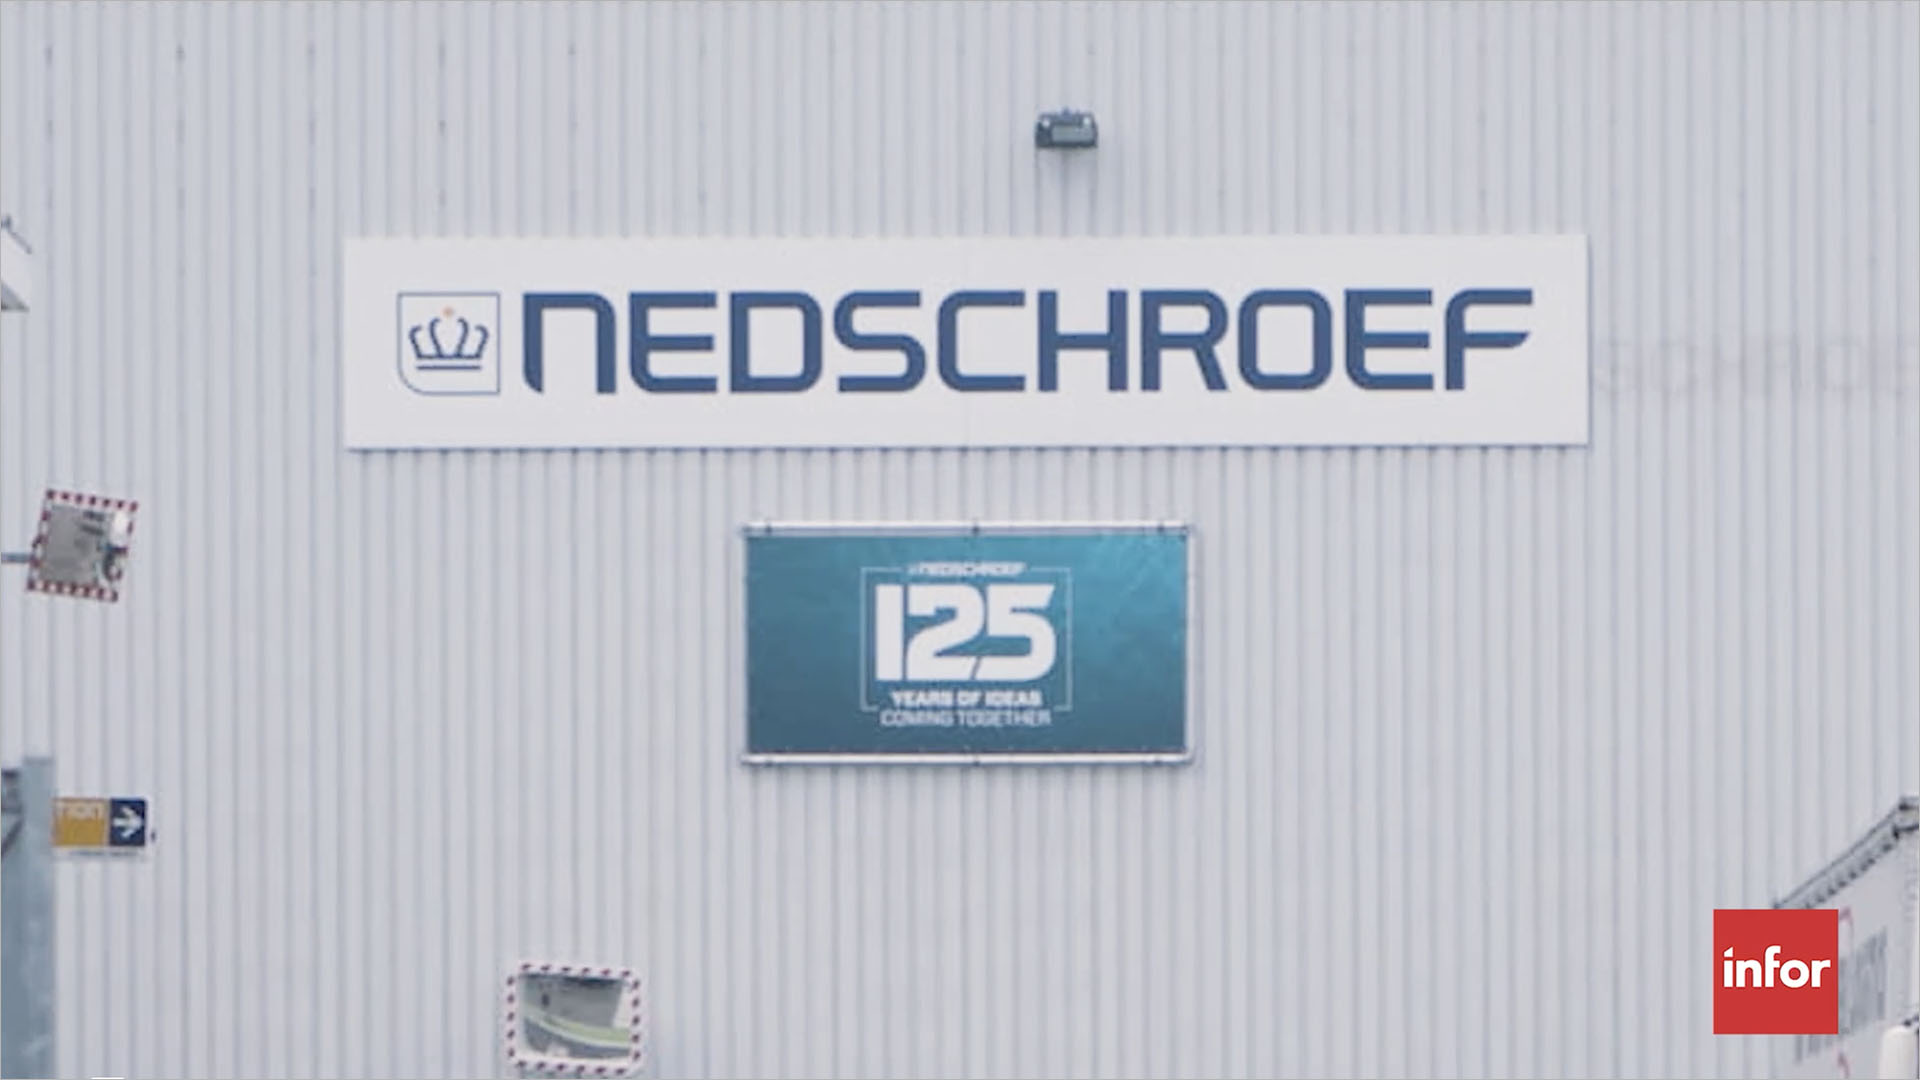 Nedschroef meets
  diverse organizational needs with CloudSuite Automotive Video case study
  English 1920x1080px